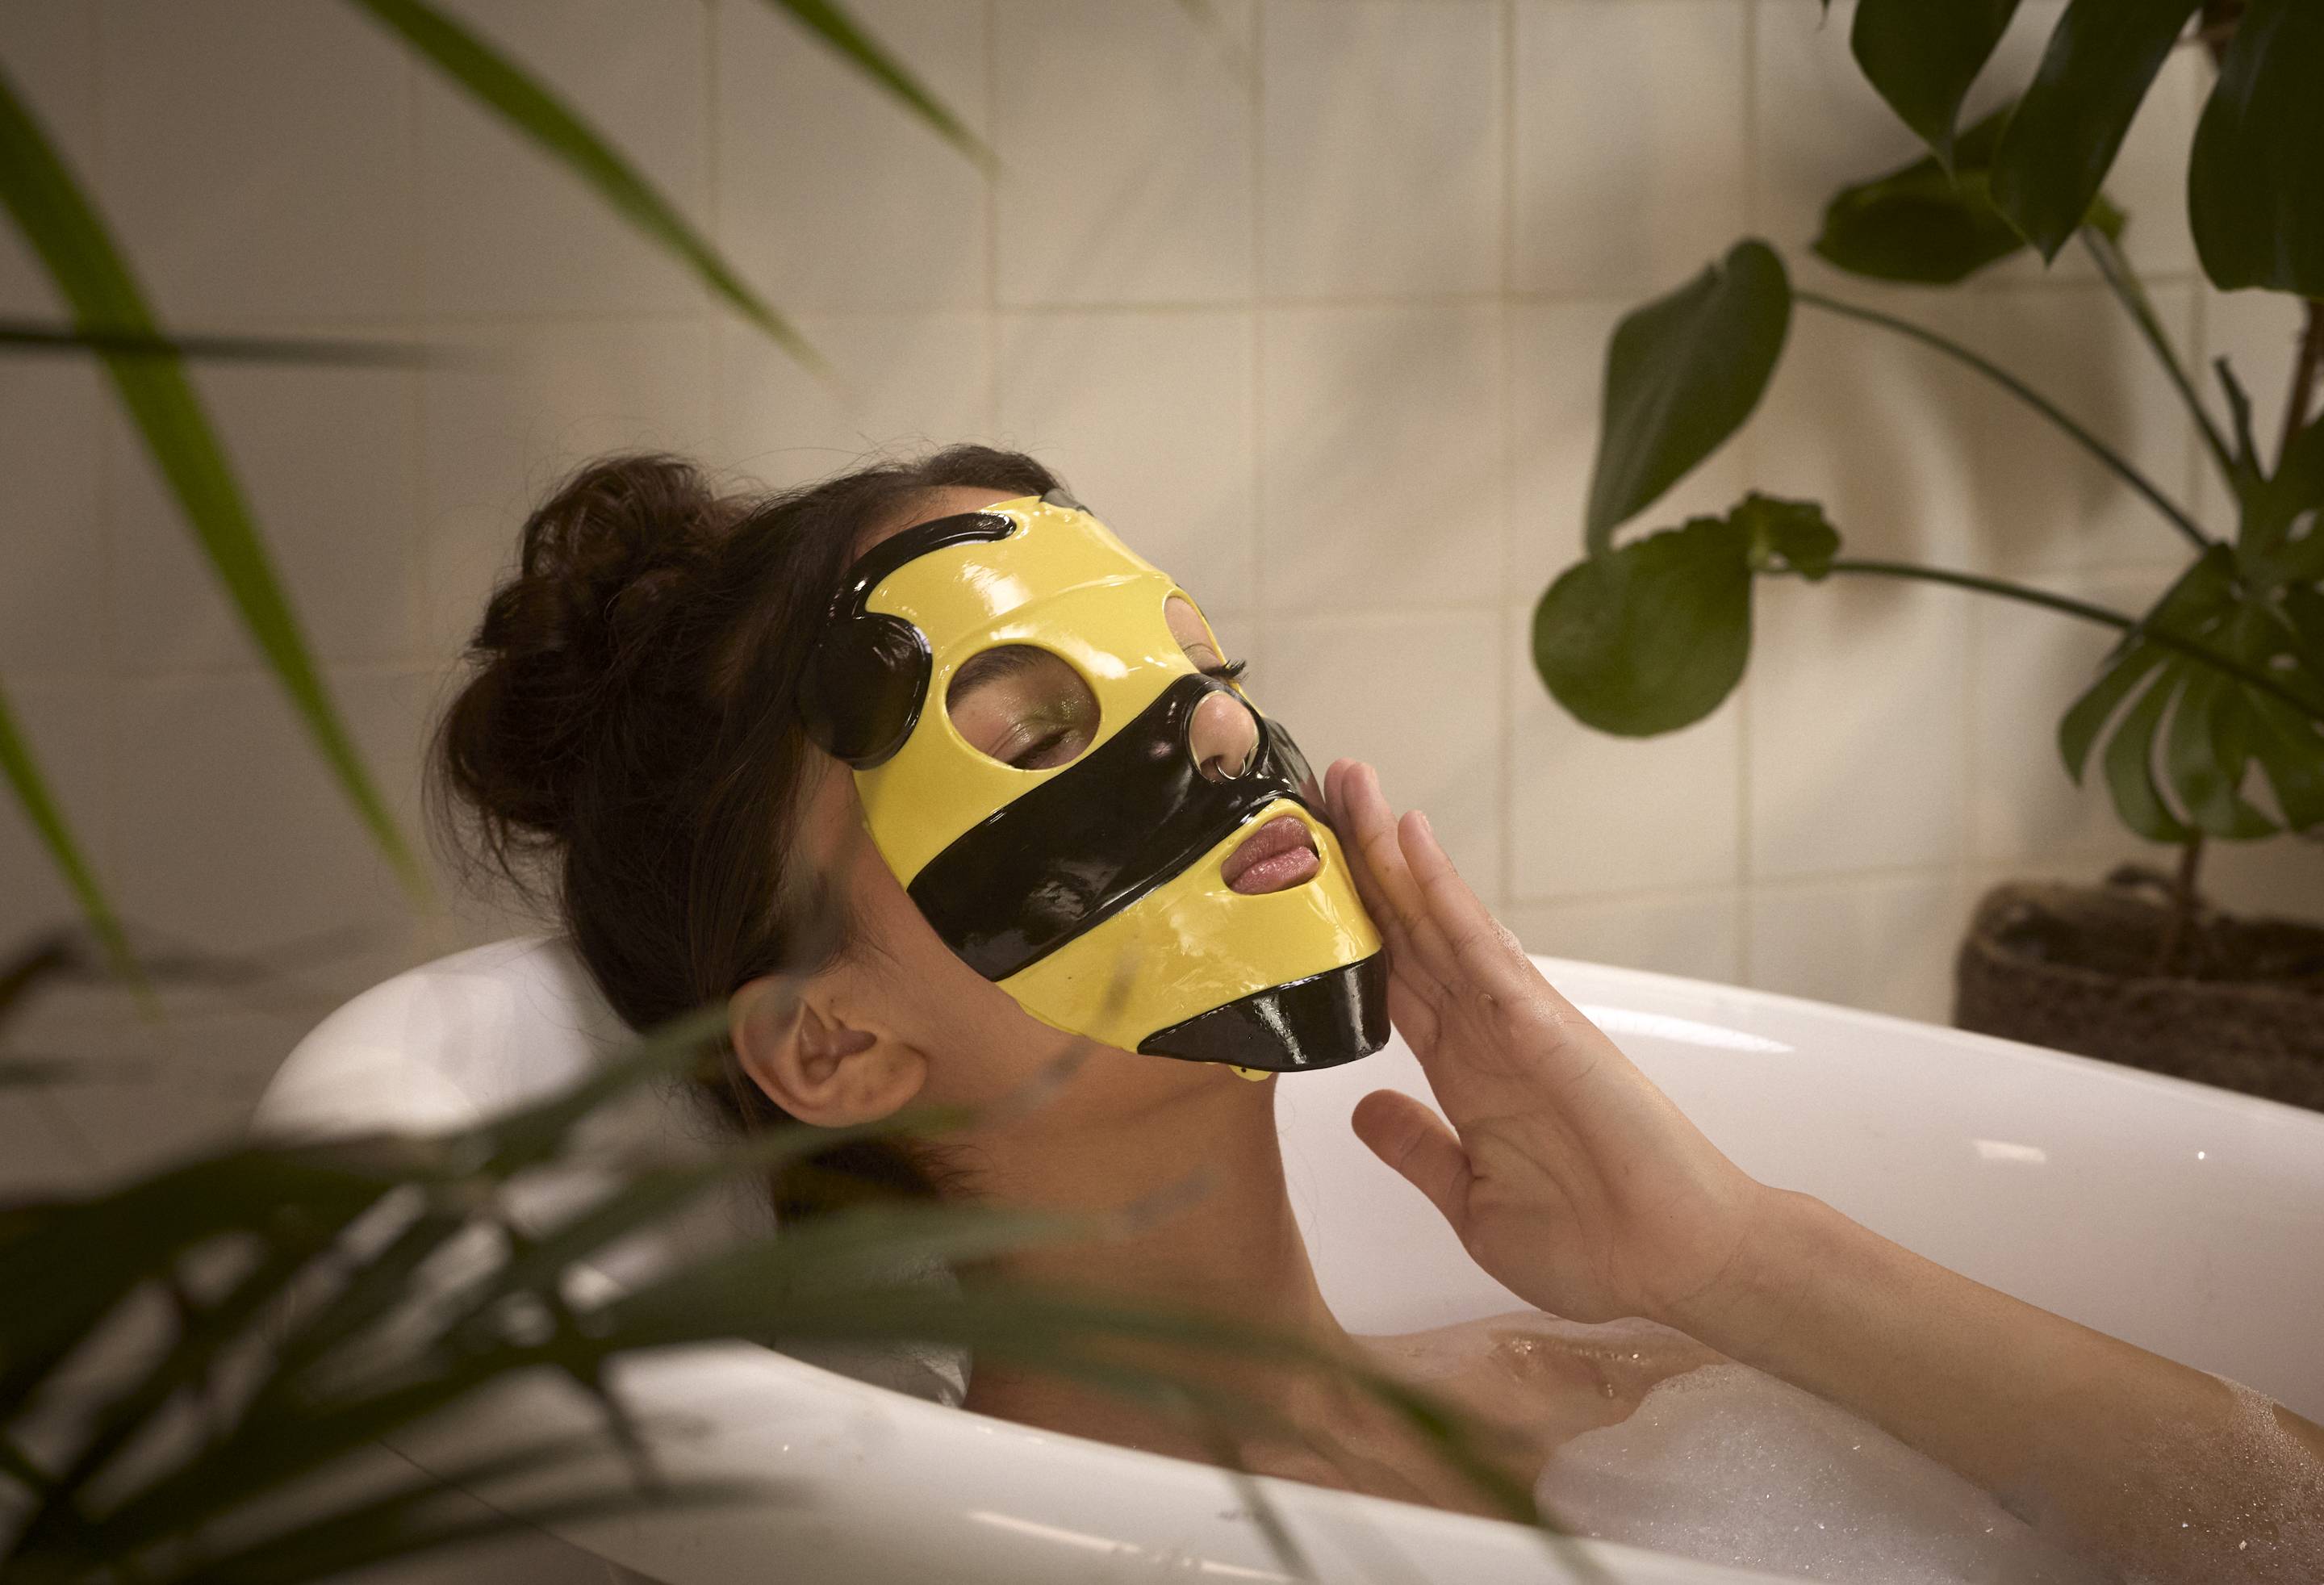 The image shows the model laid back in the bathtub with the Queen Bee sheet mask laid over their face.